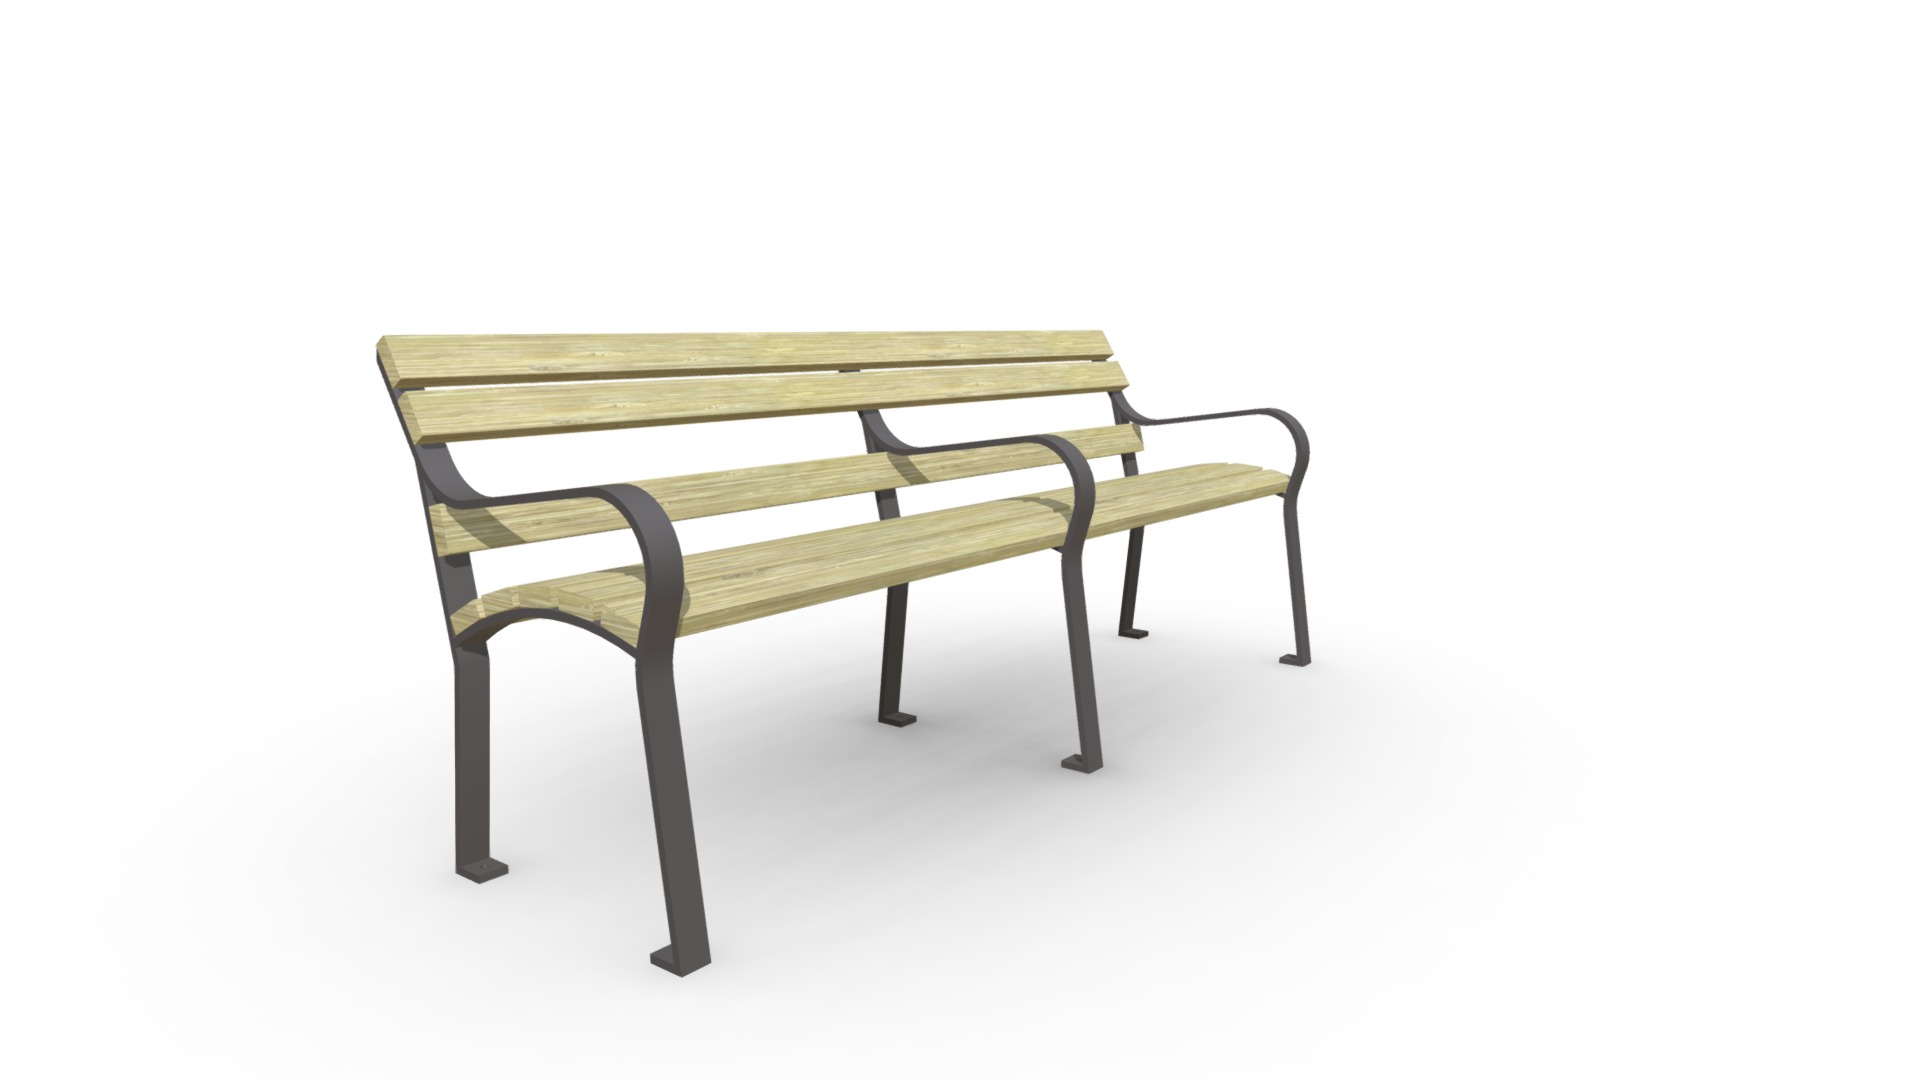 3D model SC-09.2,0 - This is a 3D model of the SC-09.2,0. The 3D model is about a wooden bench with a white background.